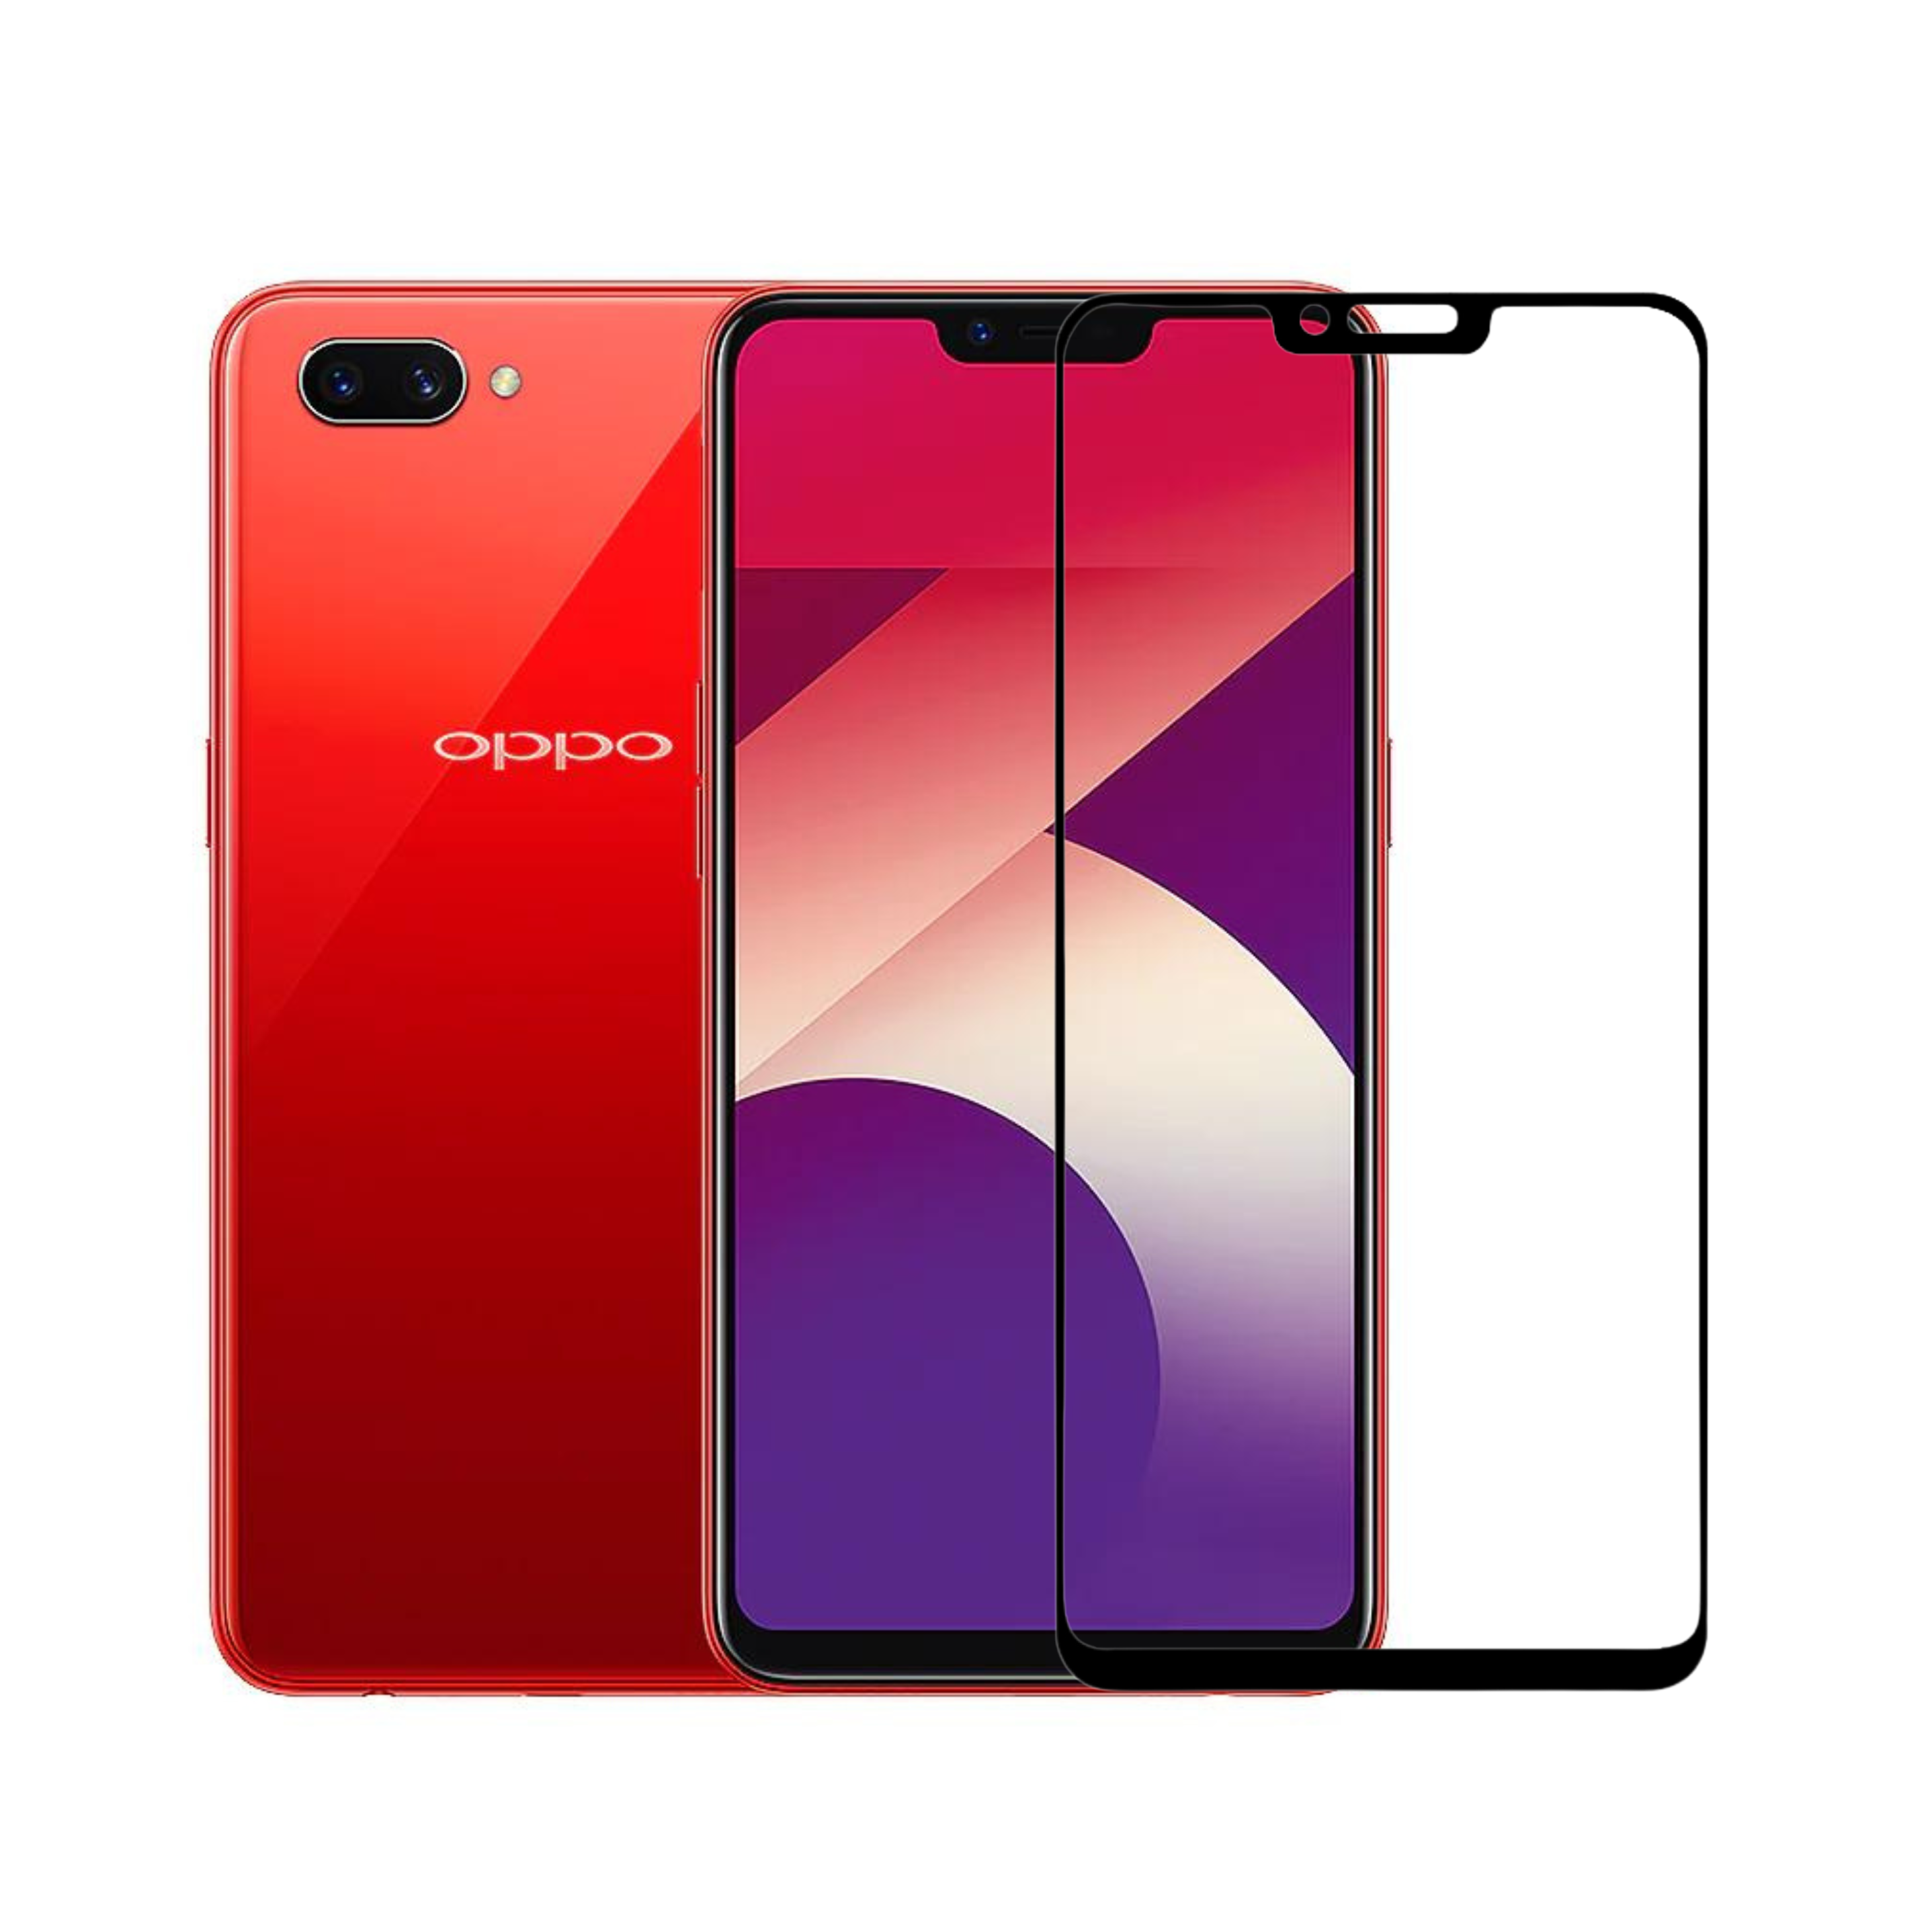 9D GLASS OPPO A3S [PL A3SOPPO-12]